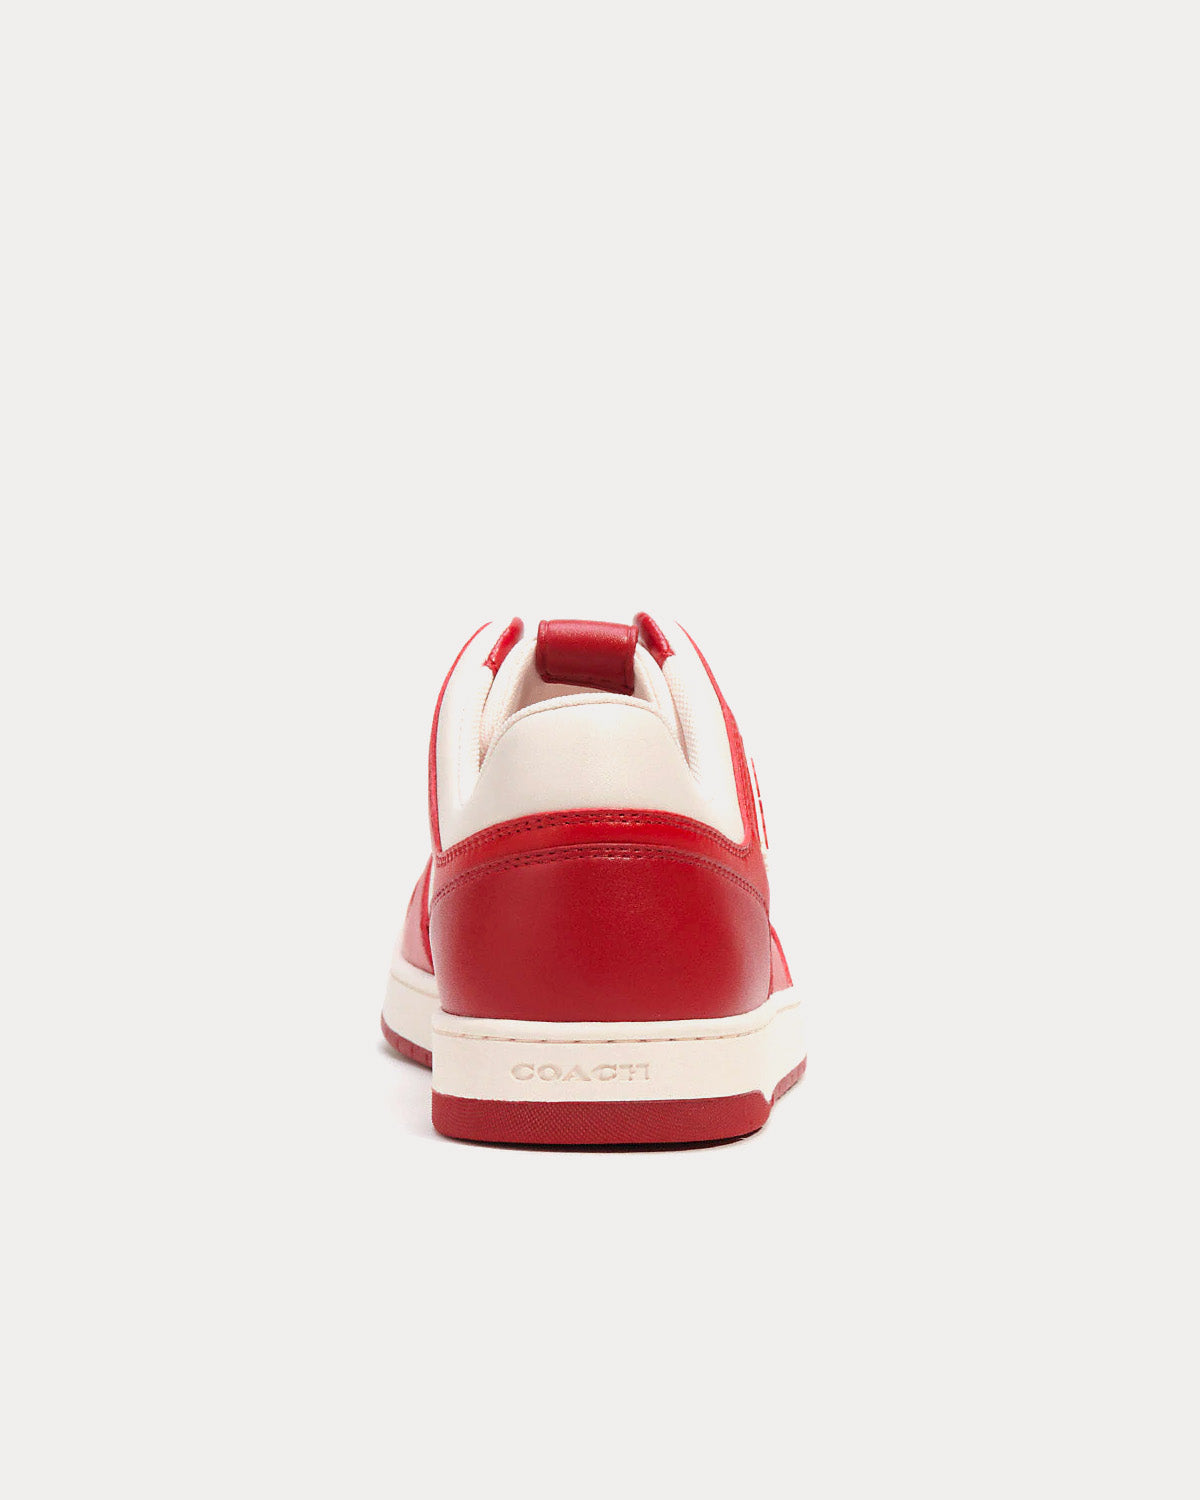 Coach - C201 Sport Red Low Top Sneakers